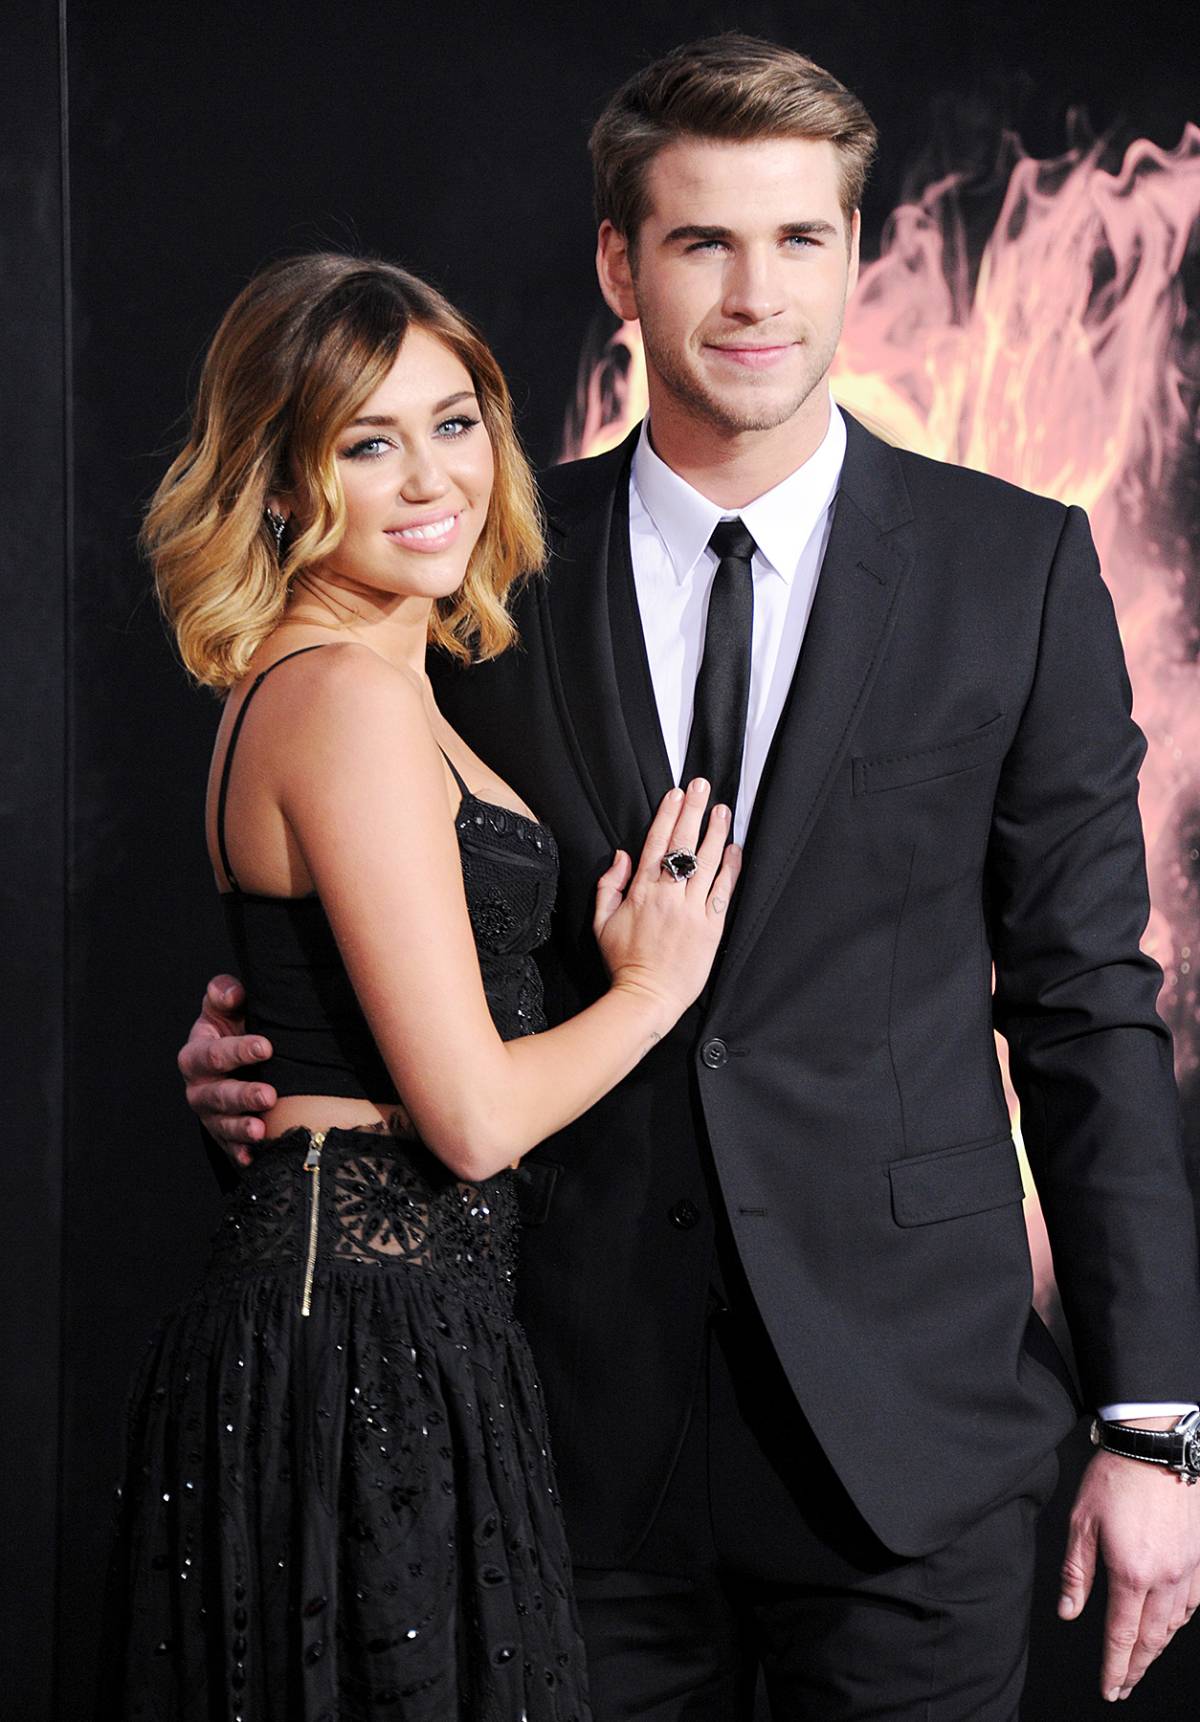 Miley Cyrus and Liam Hemsworth Relationship Timeline